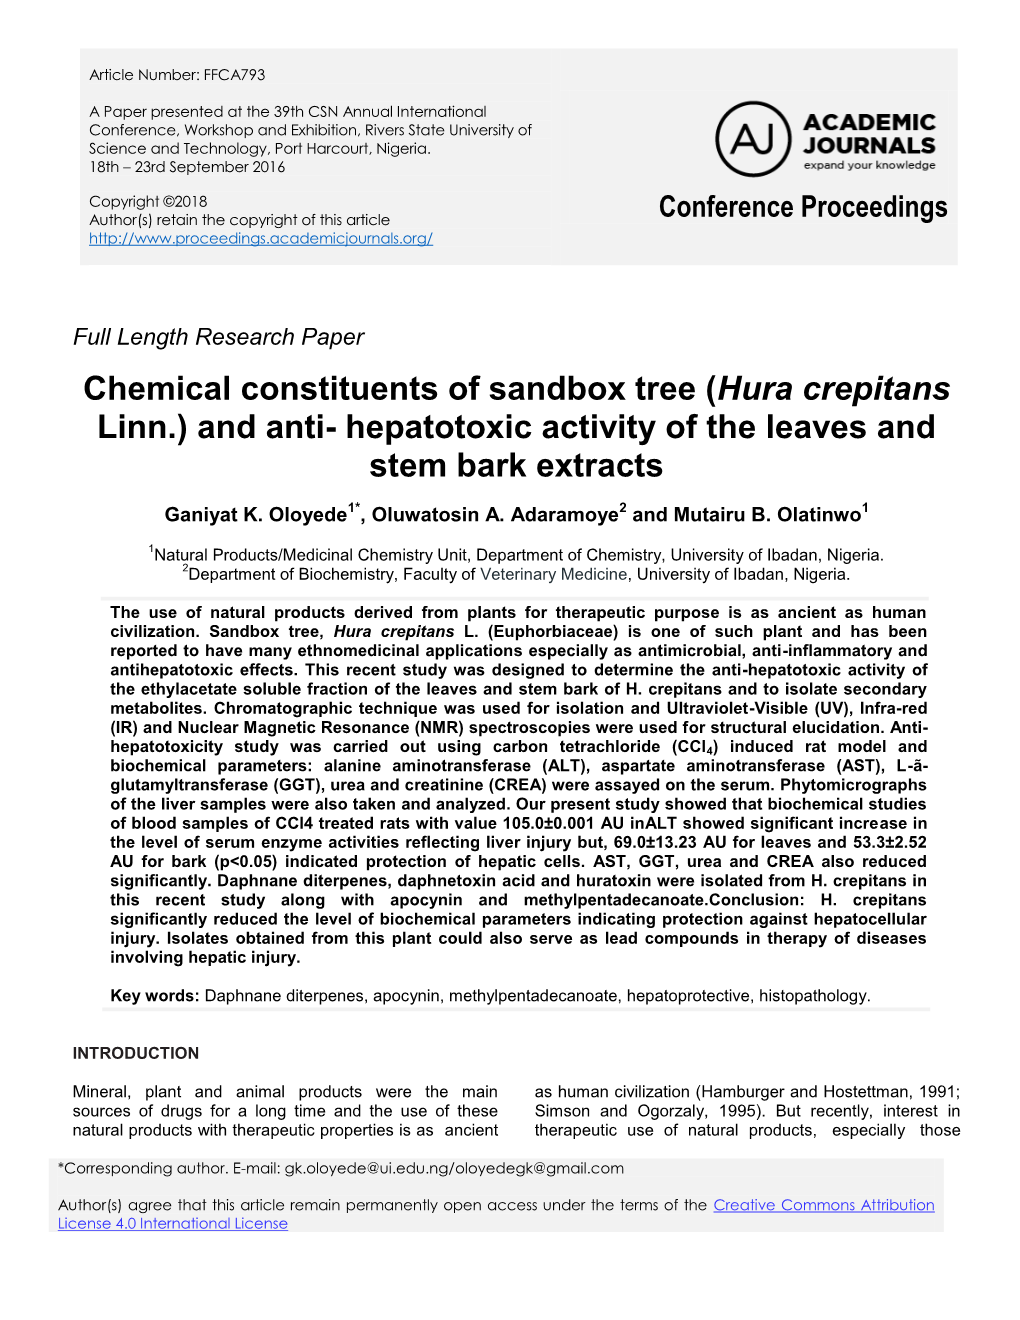 Chemical Constituents of Sandbox Tree (Hura Crepitans Linn.) and Anti- Hepatotoxic Activity of the Leaves and Stem Bark Extracts